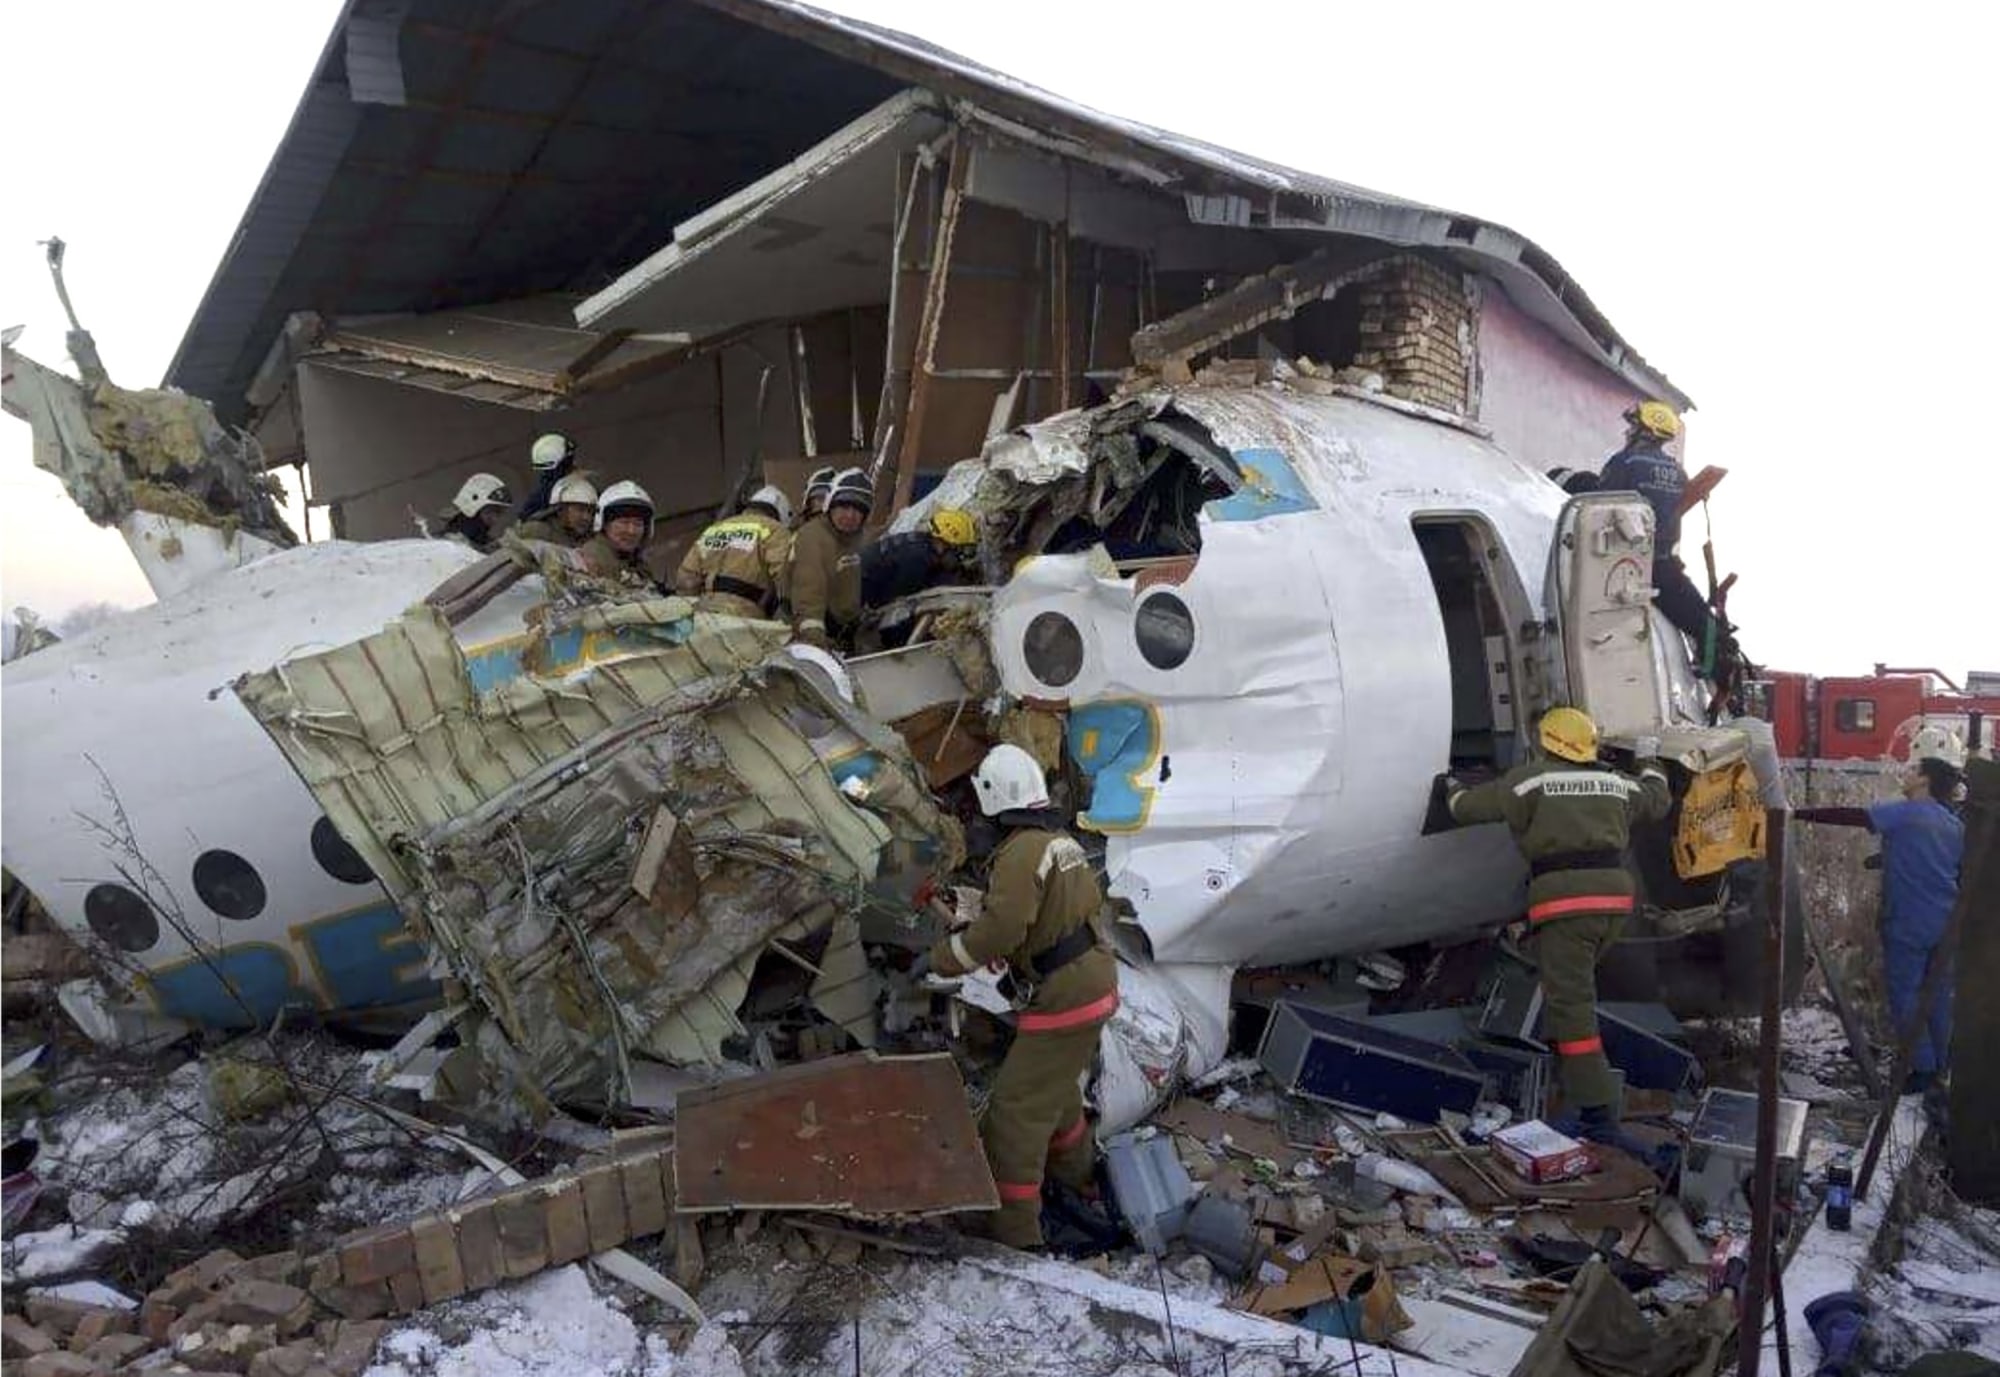 Plane crashes in Kazakhstan shortly after takeoff, at least 15 dead